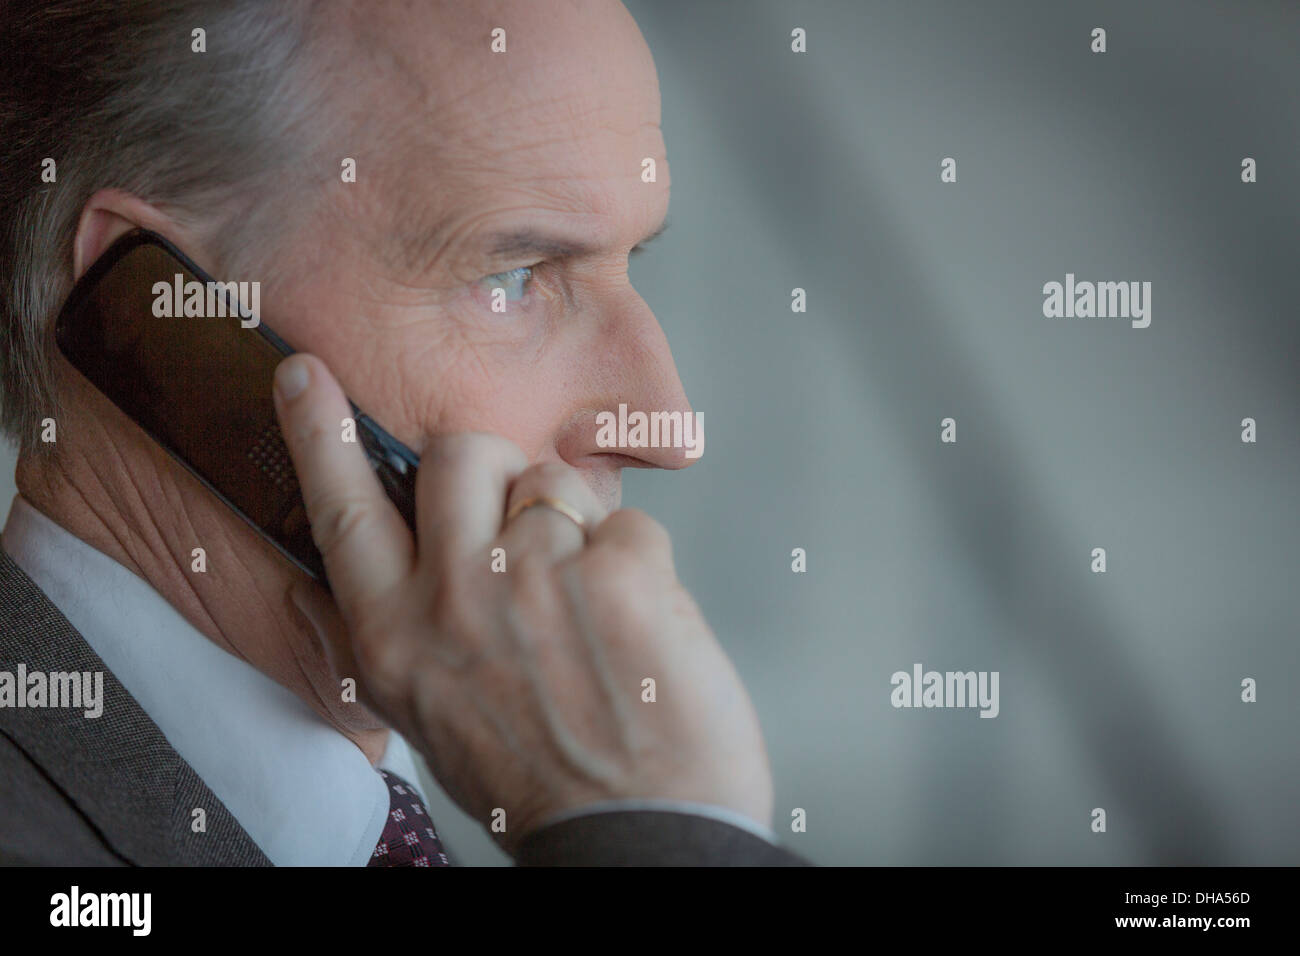 Business man talking on a mobile phone Stock Photo